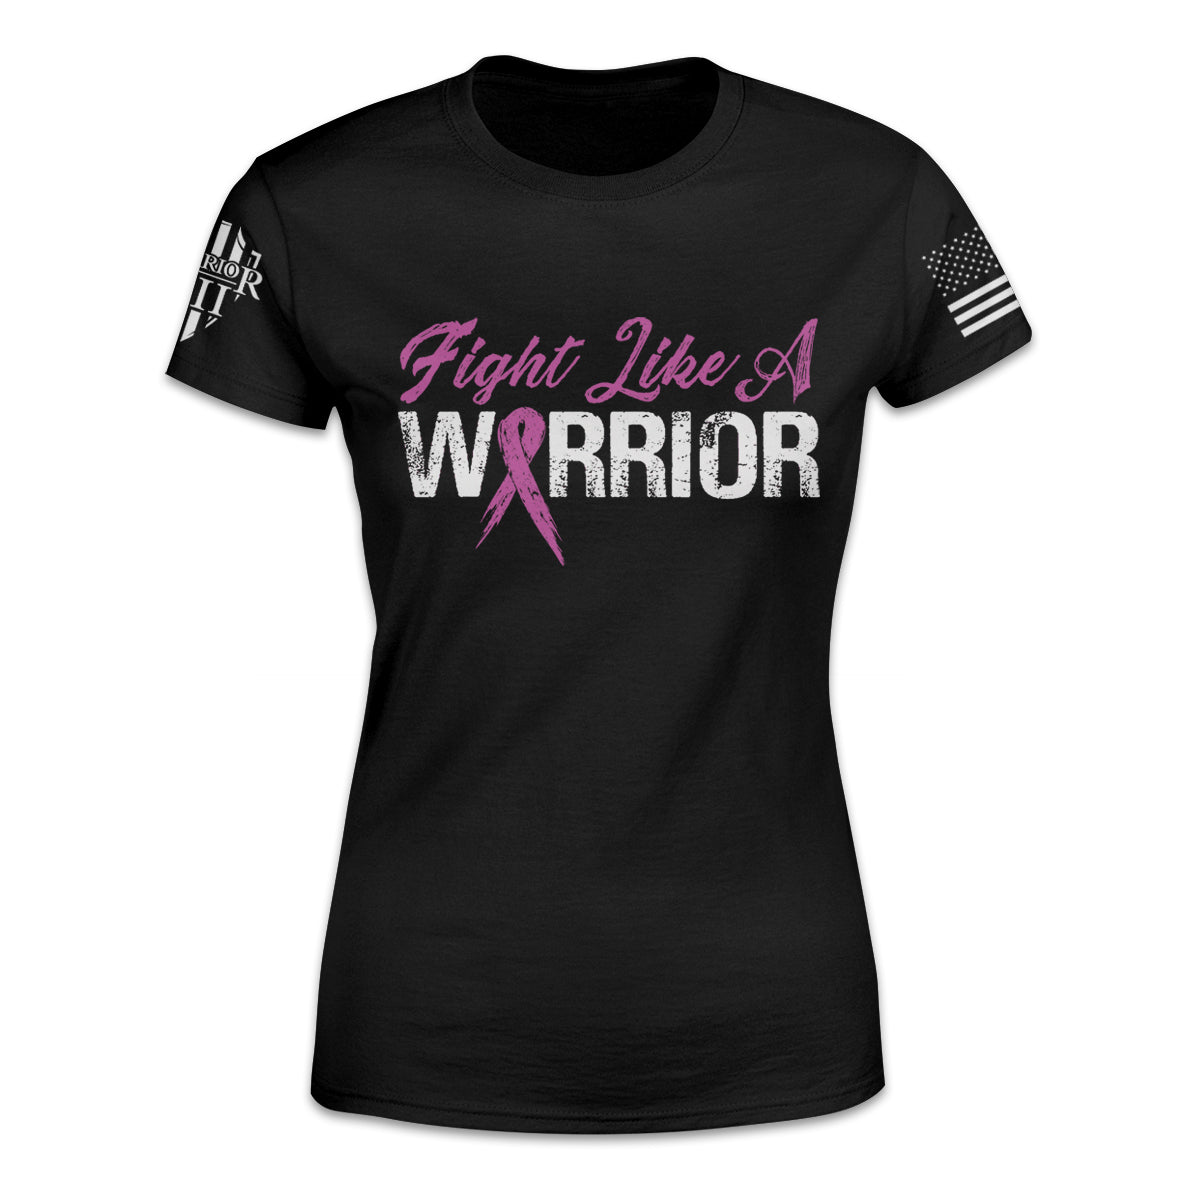 A black women's relaxed fit t-shirt with the words "Fight Like A Warrior" printed on the front of the shirt.